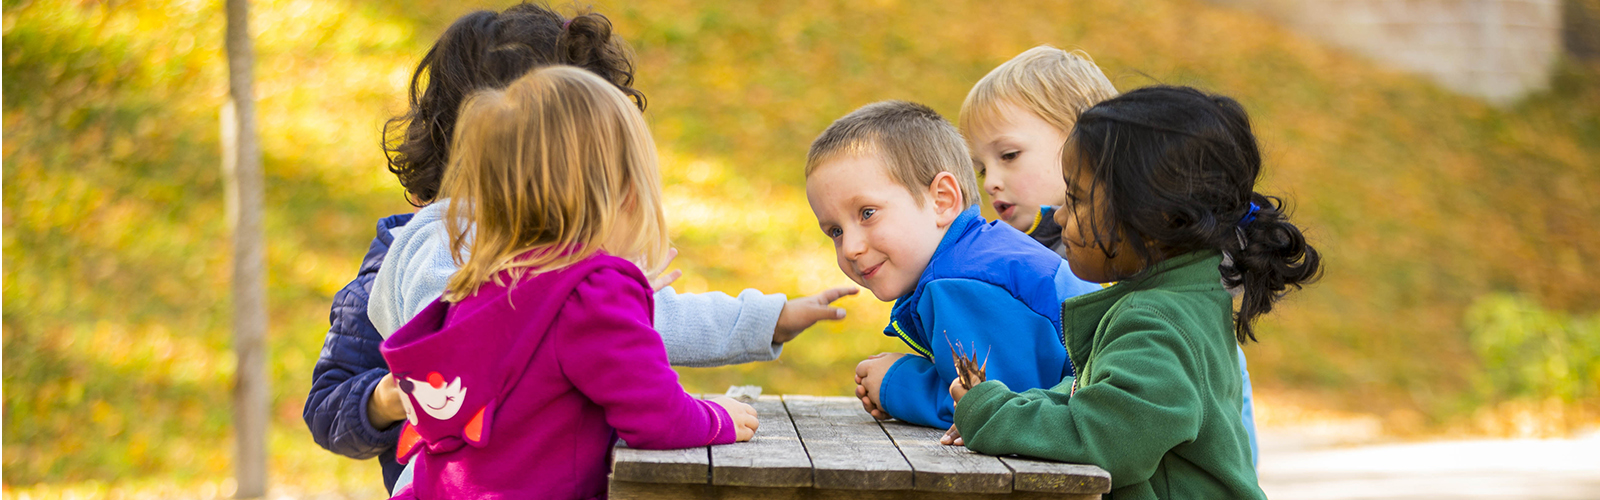 Children at picnic table